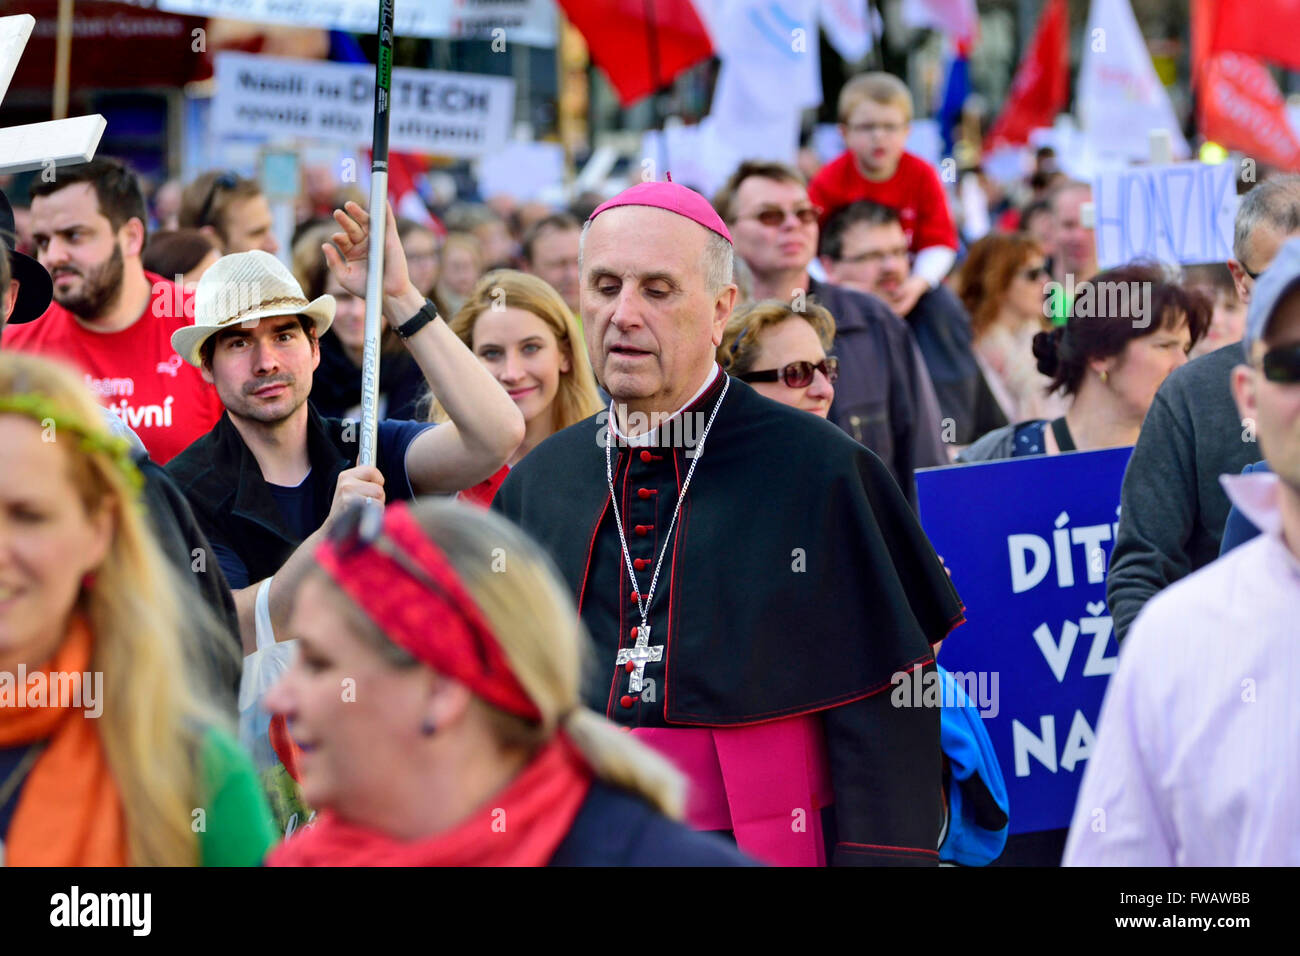 Prague, Czech Republic. 2nd April, 2016. Annual National March for Life - pro-life demonstration against abortion,organized by the Hnutí pro život (Pro-life Movement) and supported by the Greek Orthodox and Roman Catholic Churches. Bishop František Radkovský of Plzen Credit:  PjrNews/Alamy Live News Stock Photo